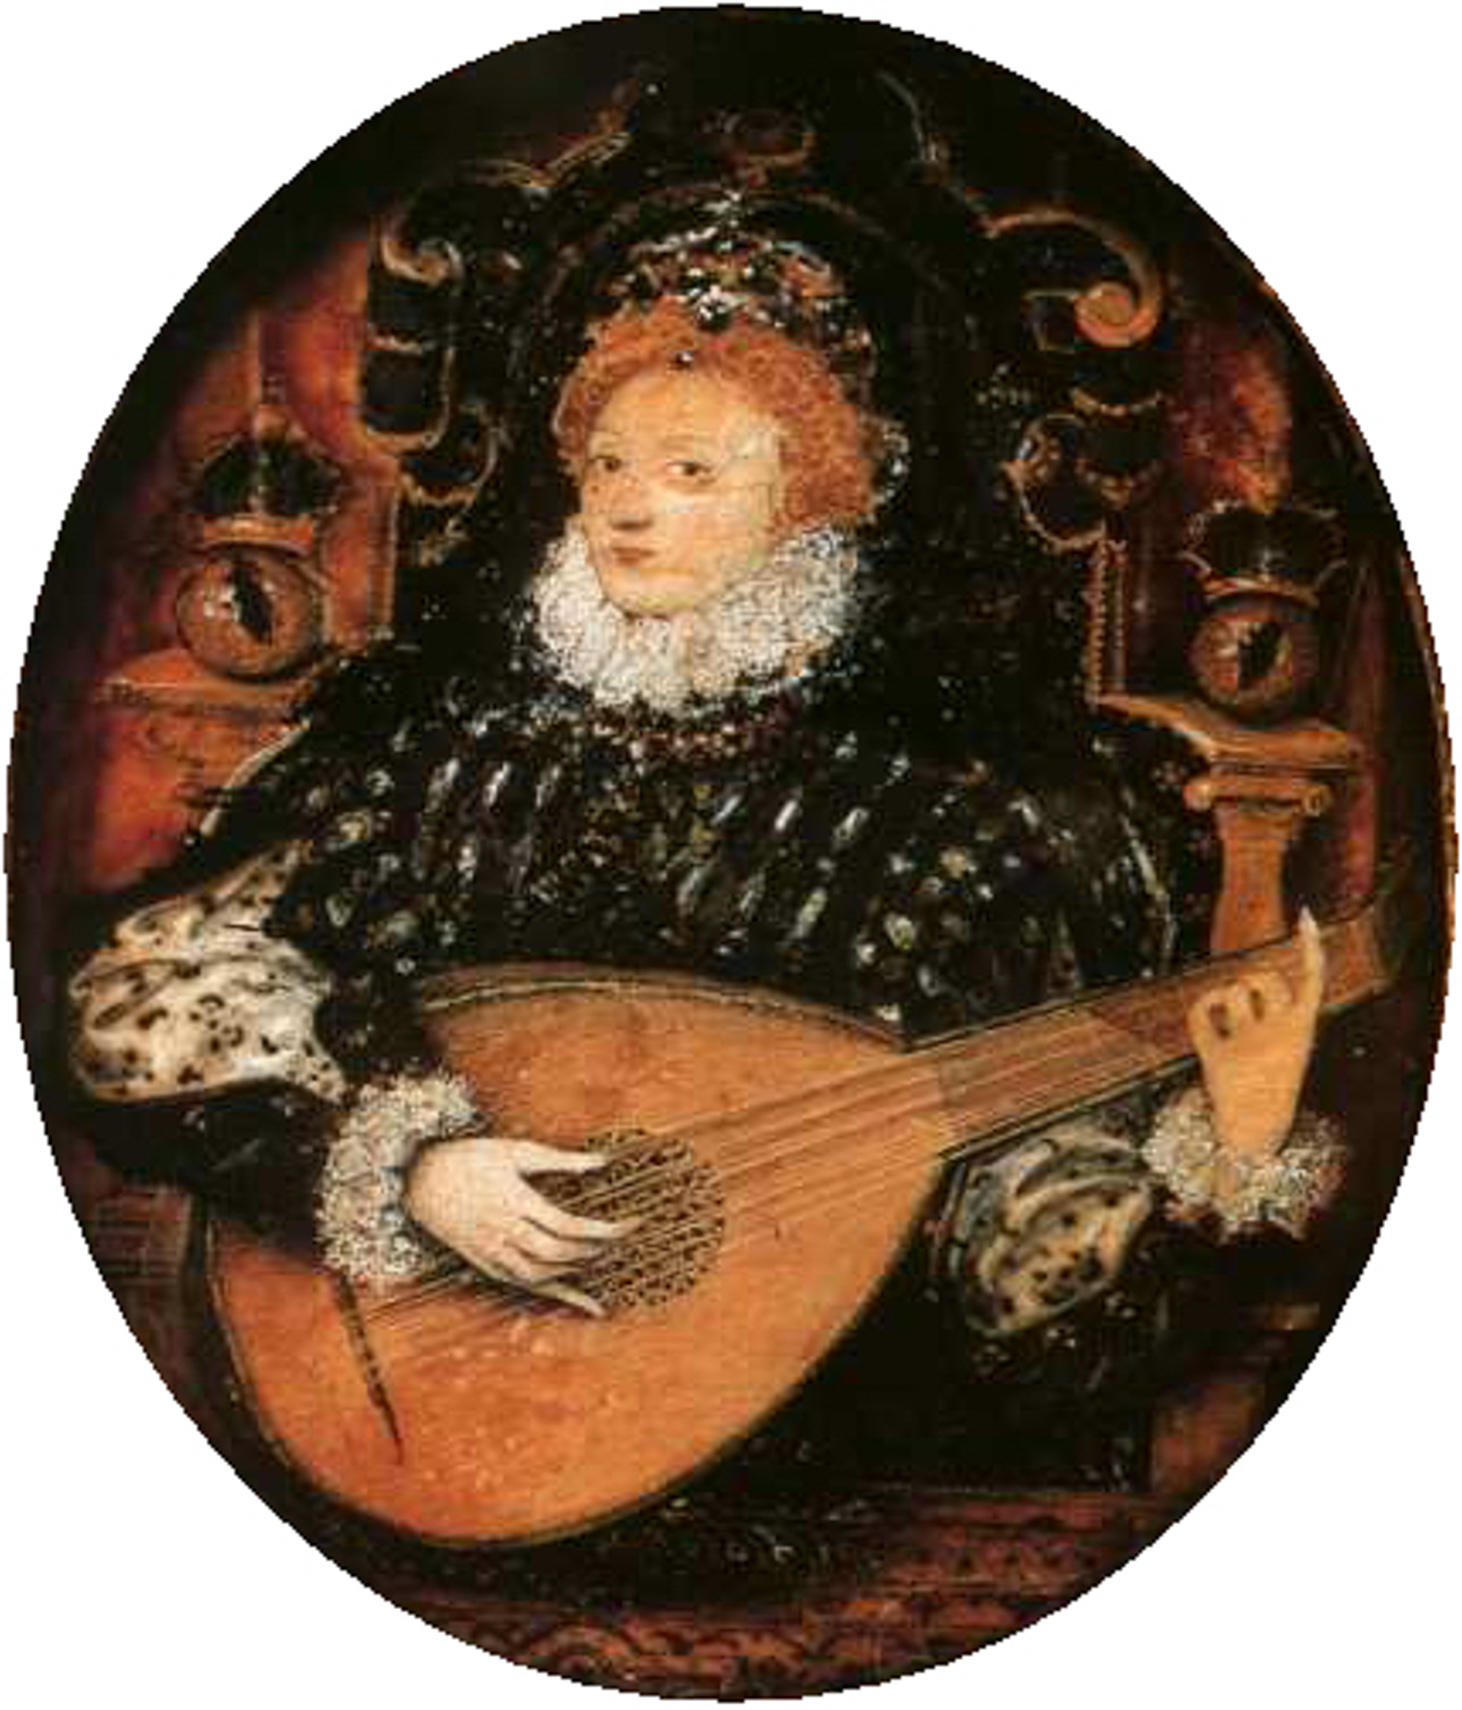 Silver sounded Lutes and other musicall Instruments Elizabethan music in Cambridge University Library